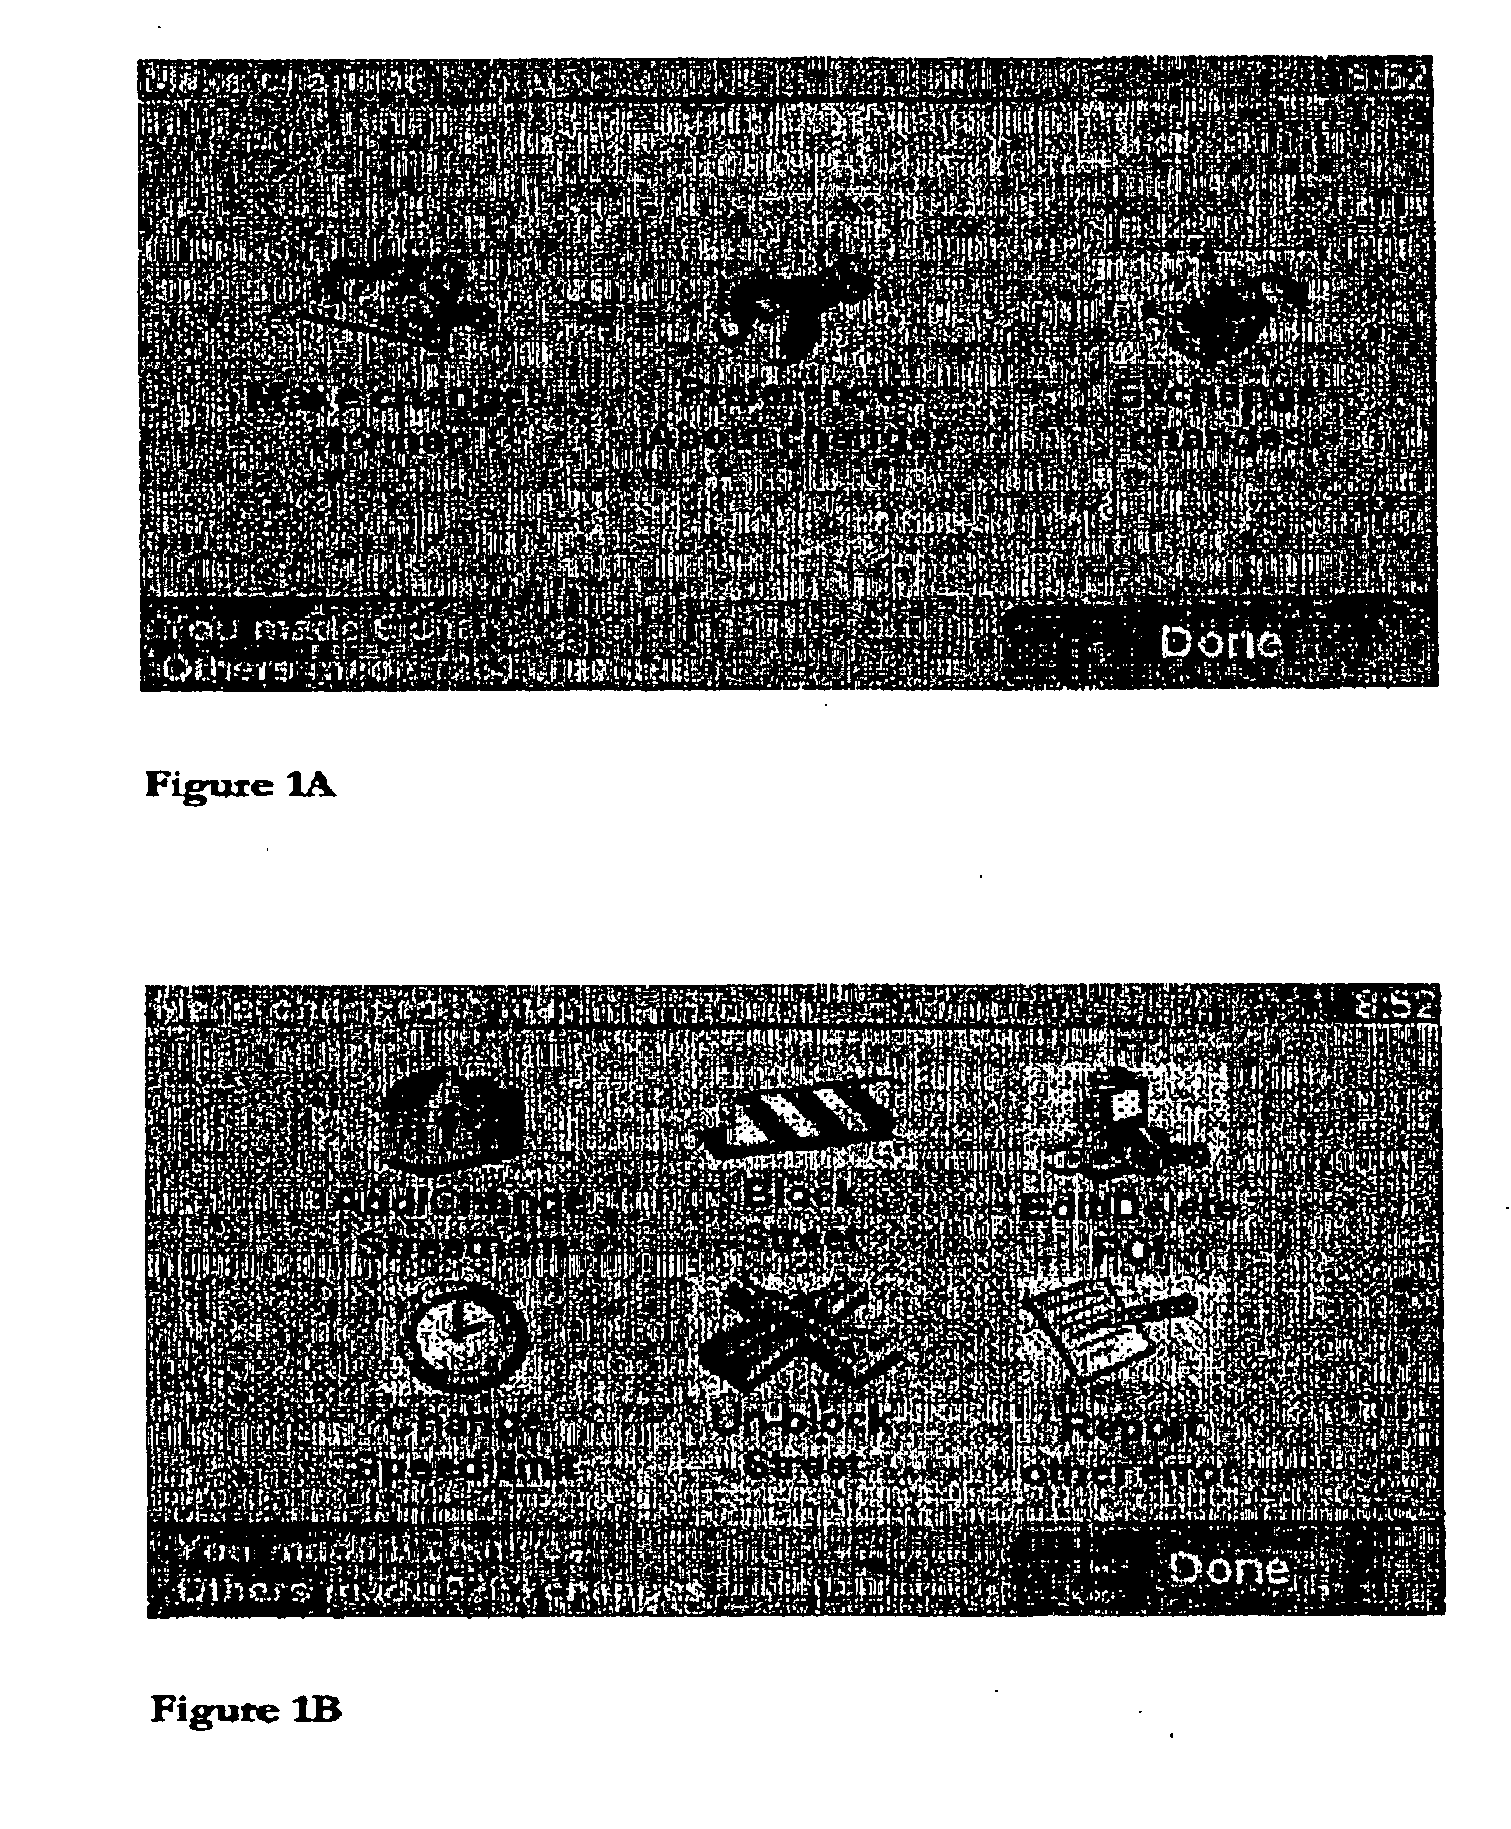 Method of generating improved map data for use in navigation devices